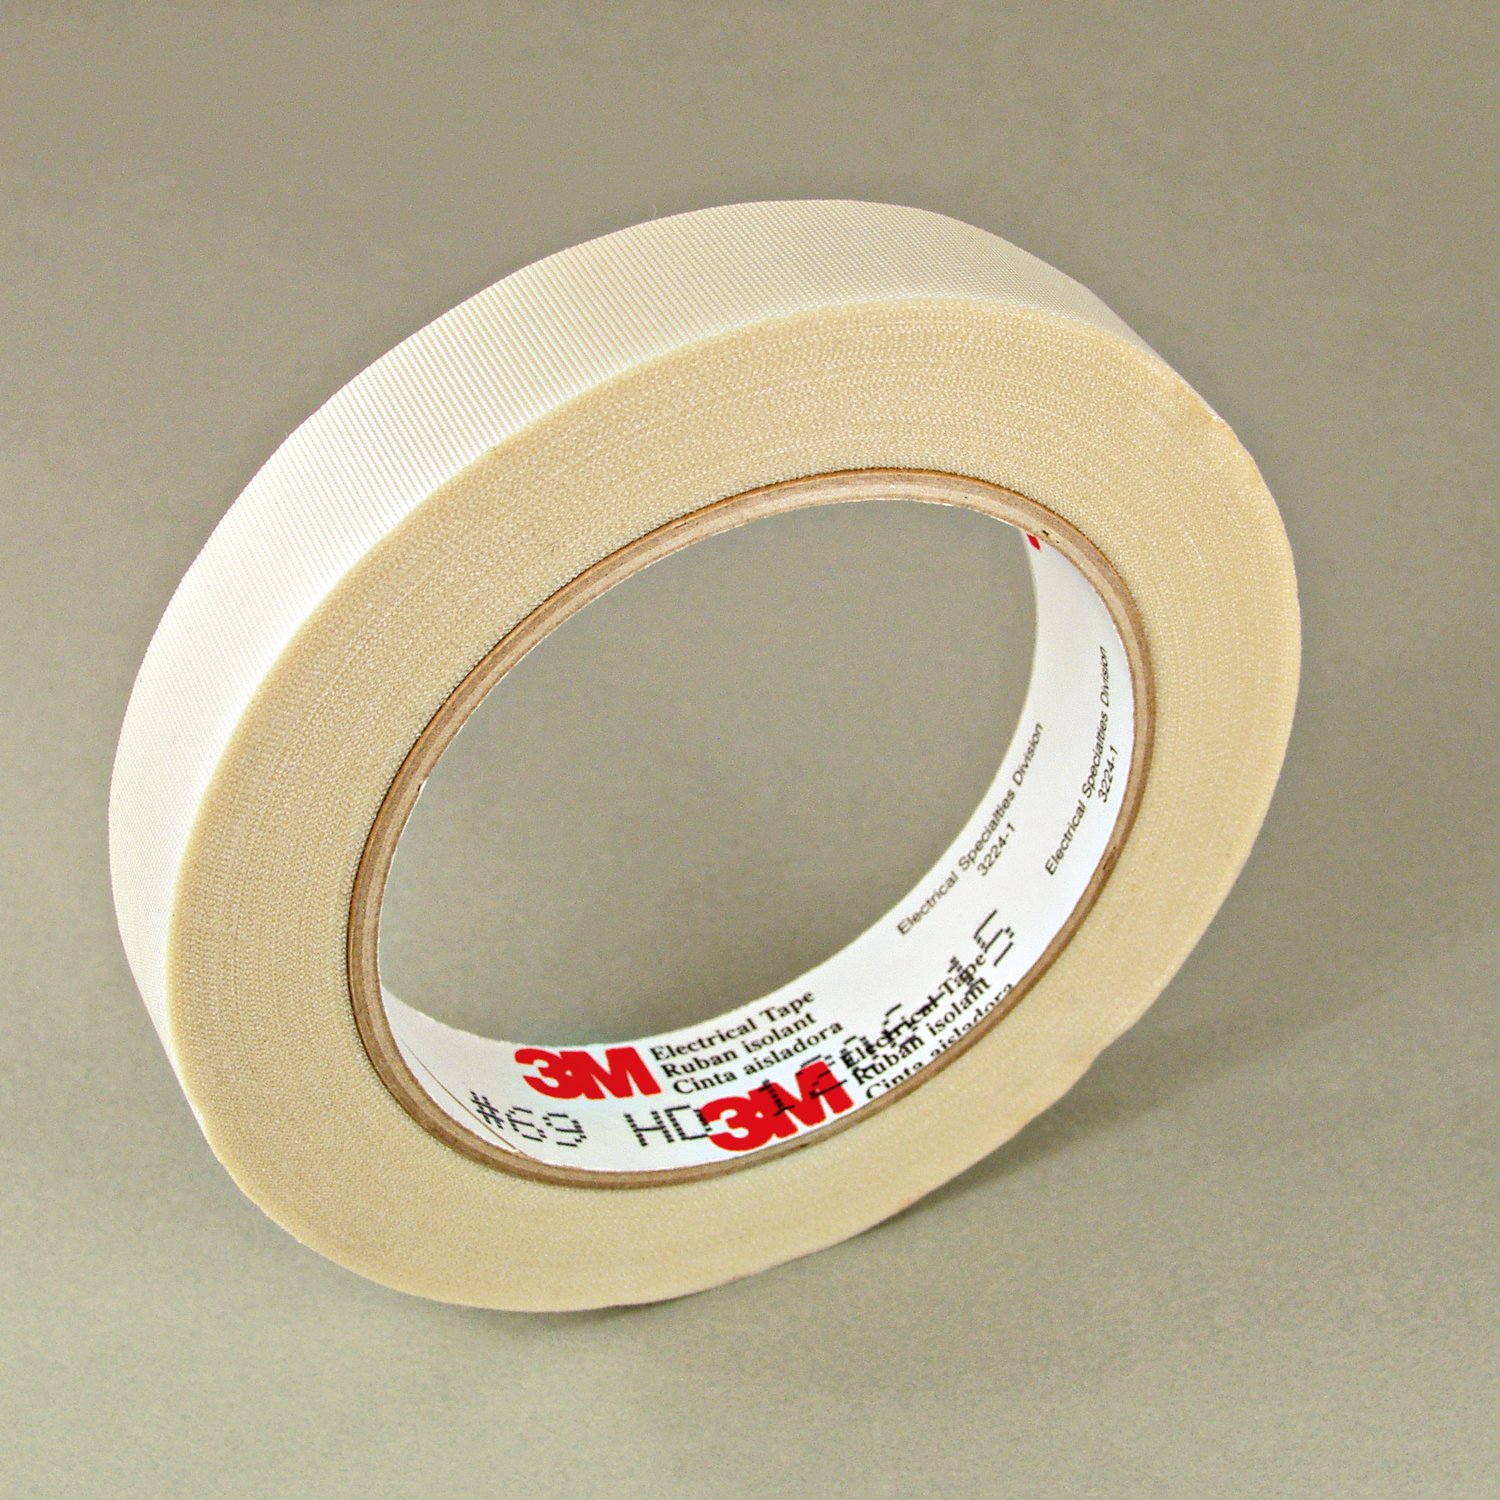 3/8" 3M 69 Glass Cloth Electrical Tape (3M69) with Silicone Adhesive 180°C, white, 3/8" wide x  36 YD roll